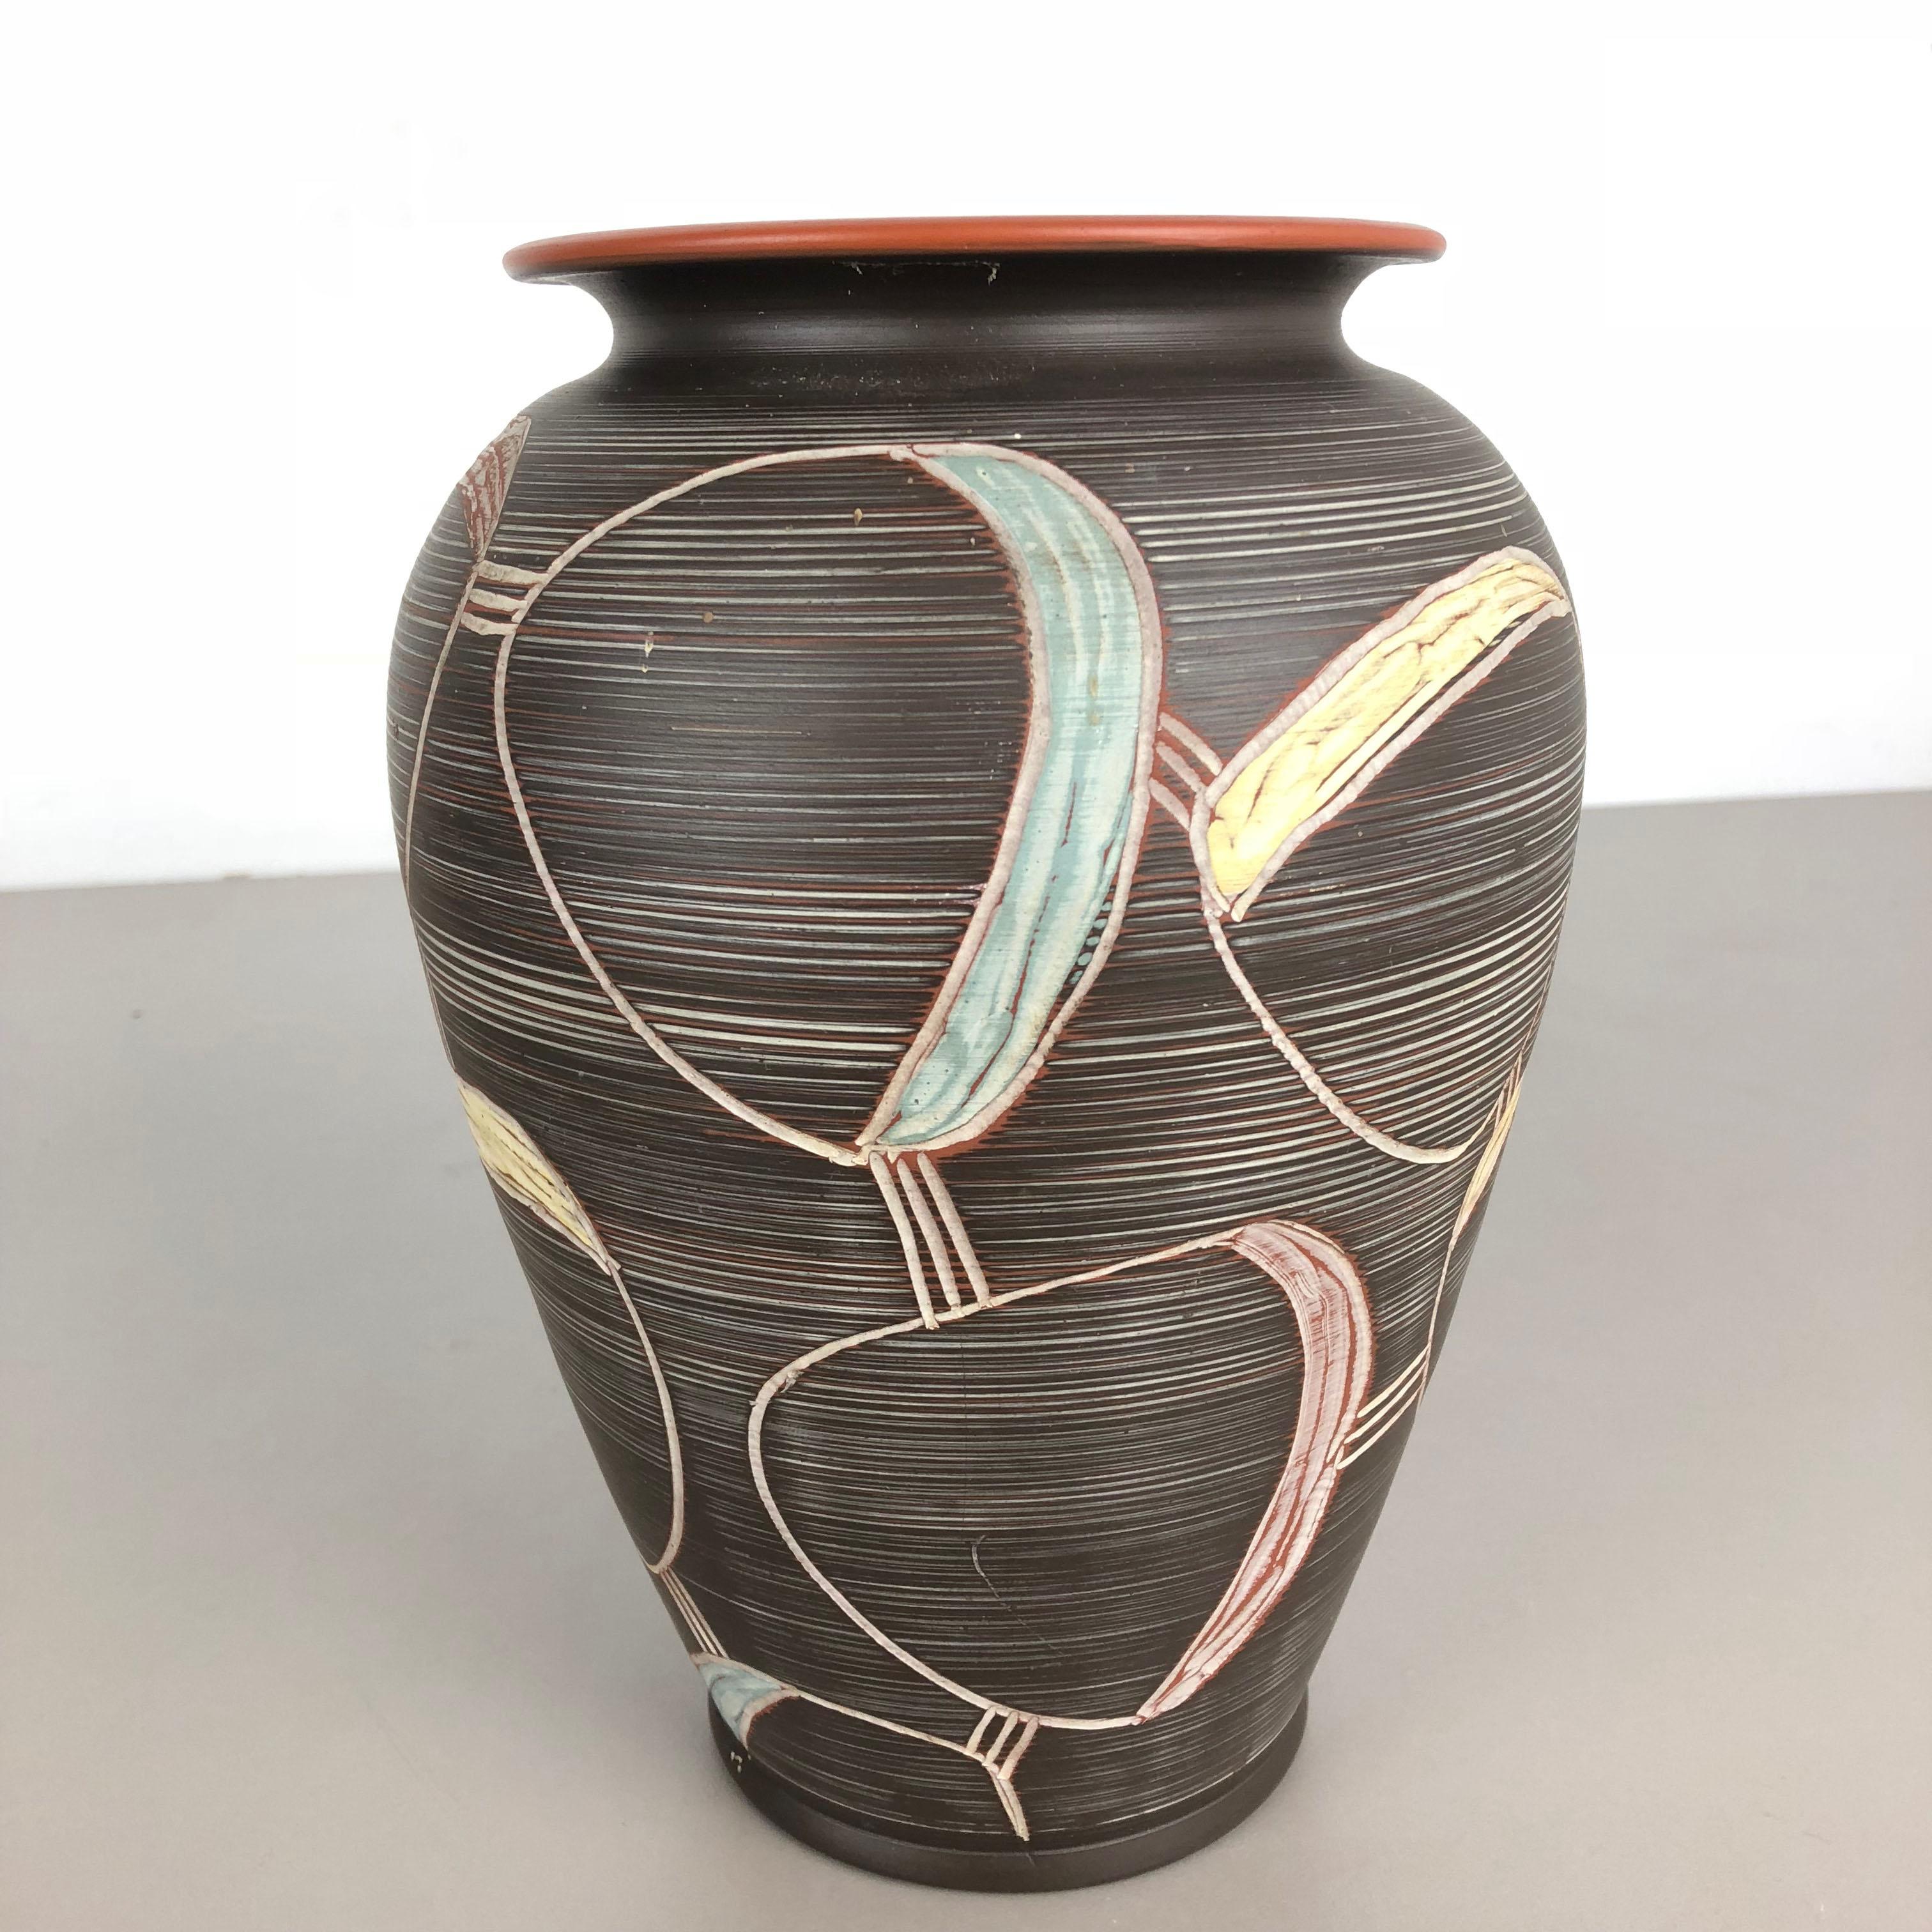 20th Century Large Abstract Ceramic Pottery Vase by Sawa Franz Schwaderlapp, Germany, 1950s